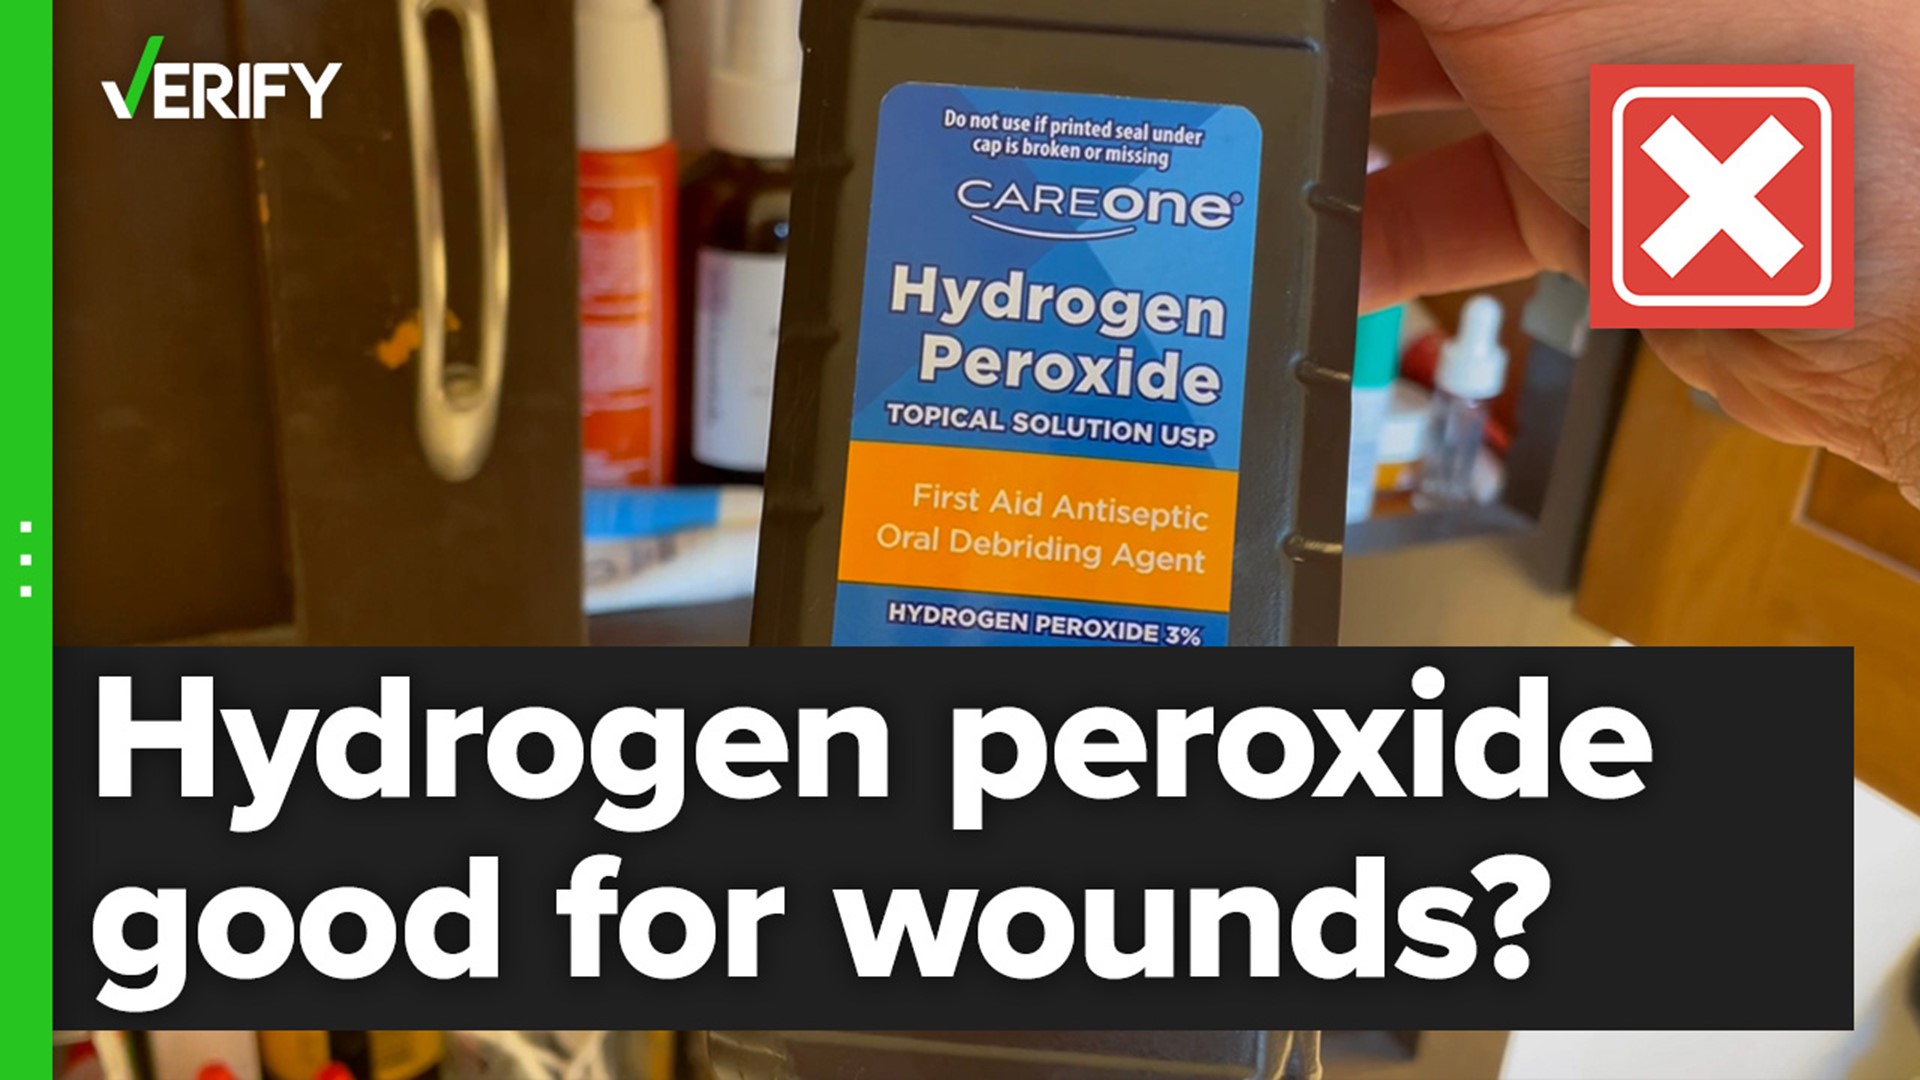 Health experts warn against using hydrogen peroxide to treat or clean minor scrapes or cuts because it can irritate the skin and kill healthy cells within the wound.